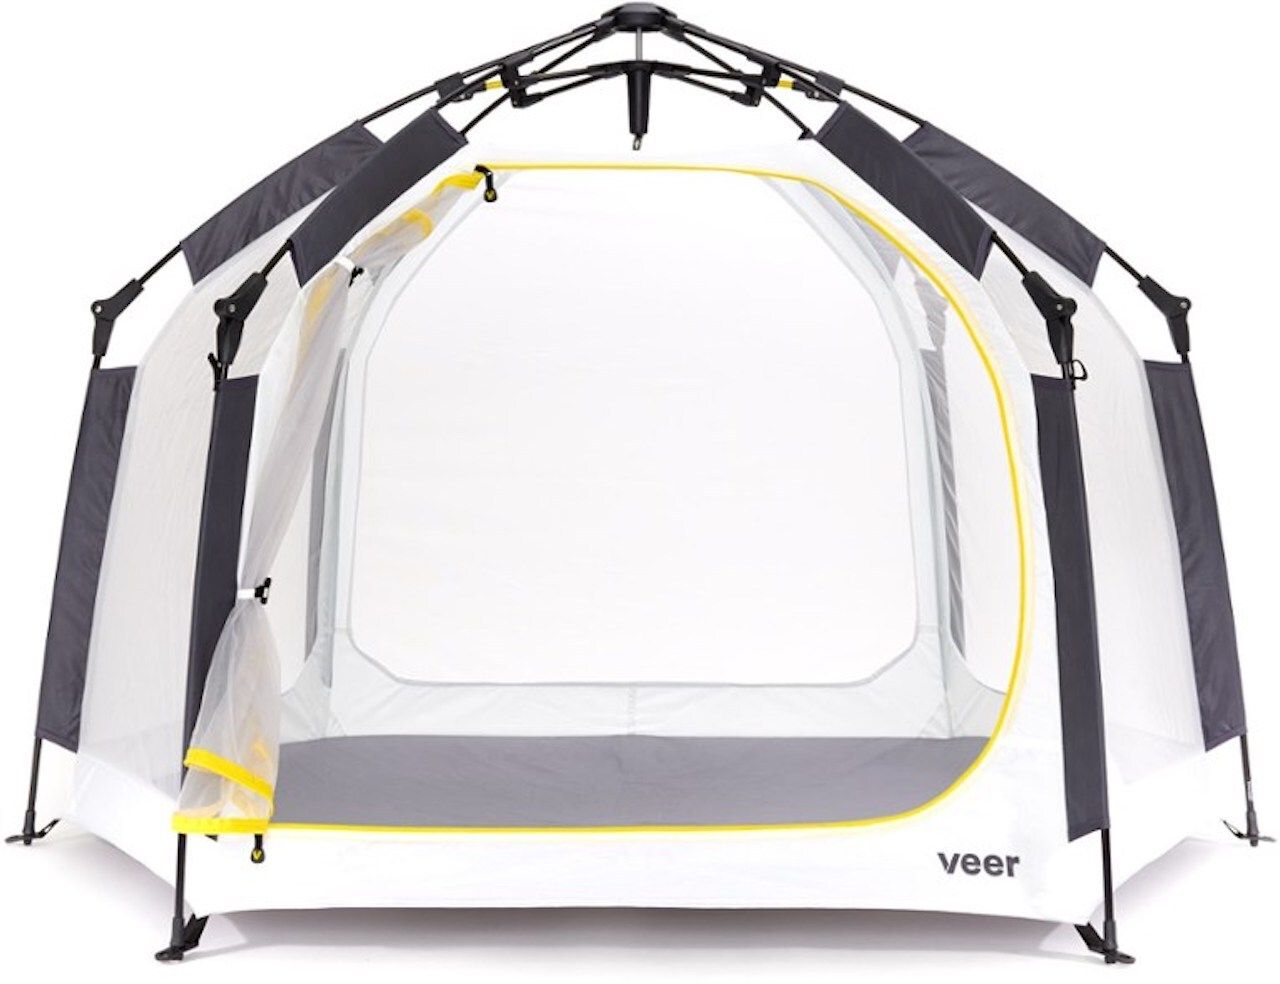 The Veer Basecamp Shelter is ideal for family camping trips